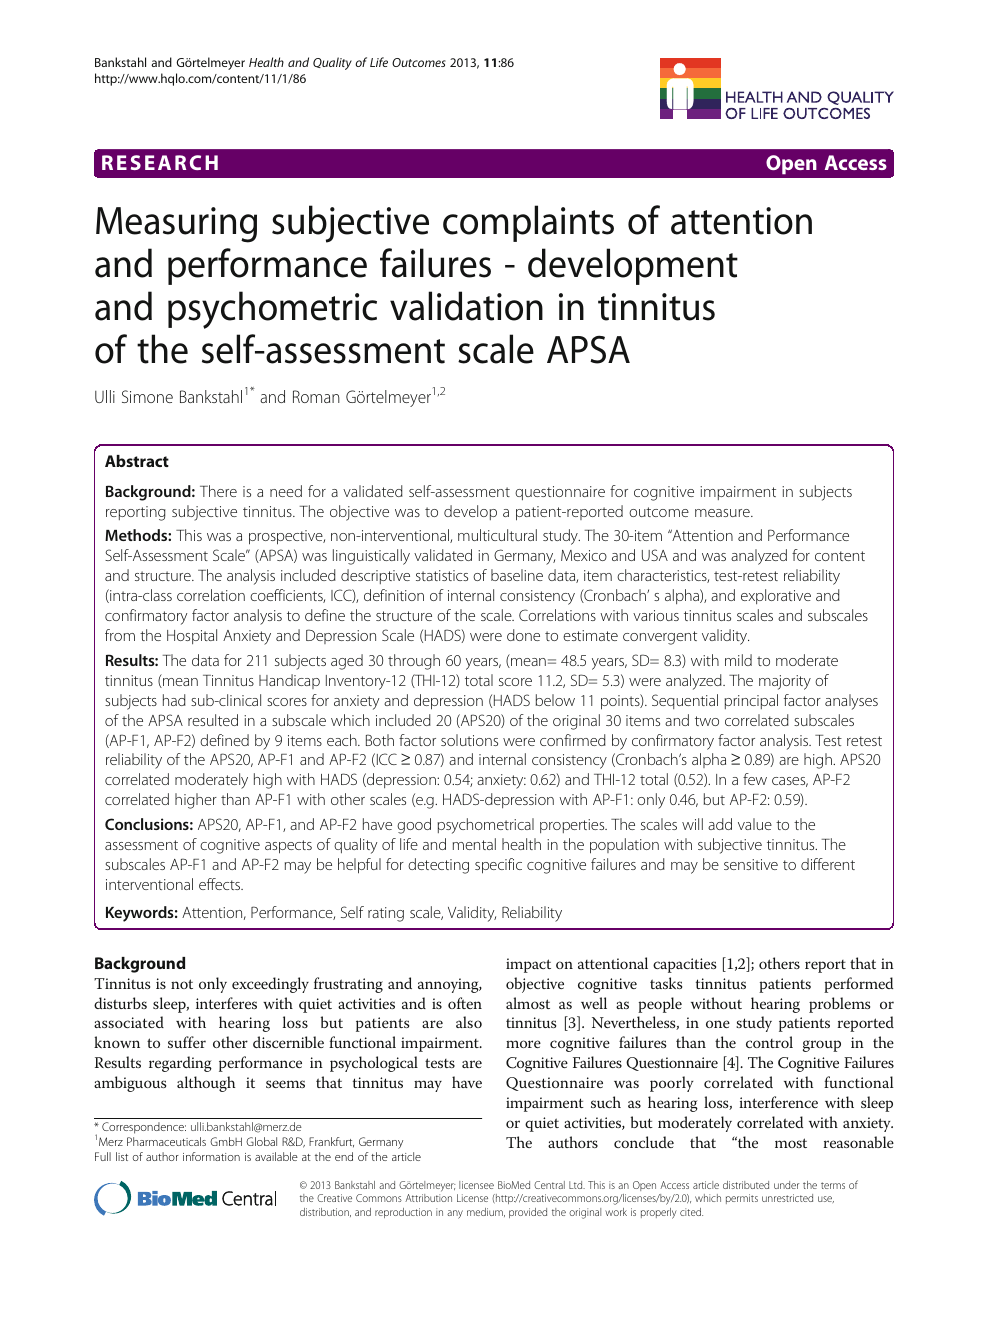 Measuring subjective complaints of attention and performance